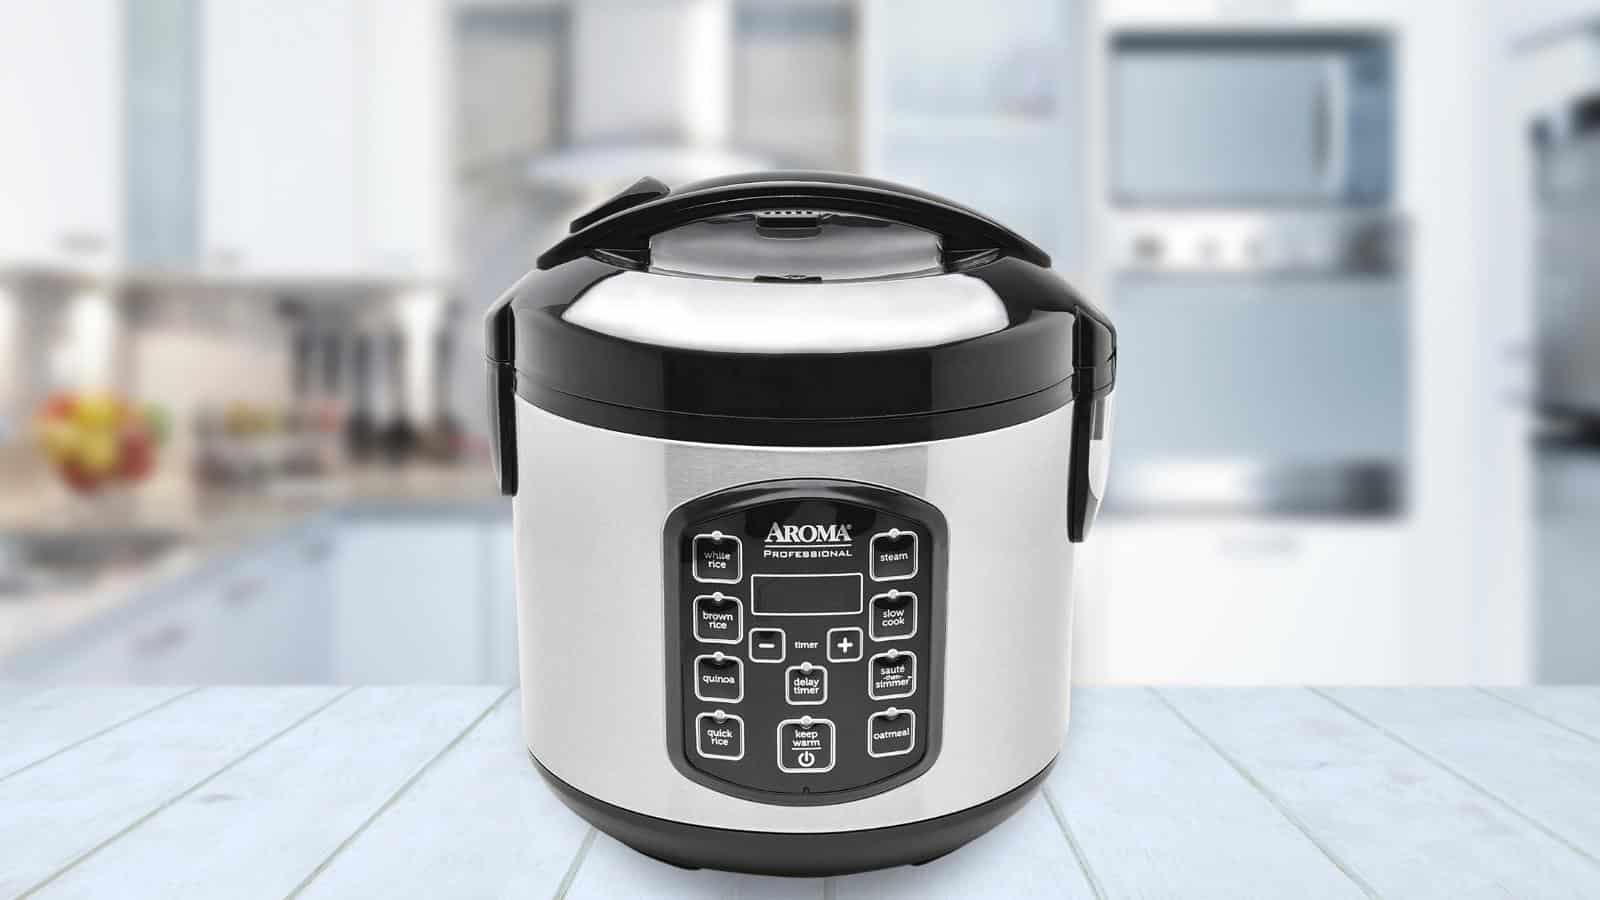 Aroma Rice Cooker Not Working